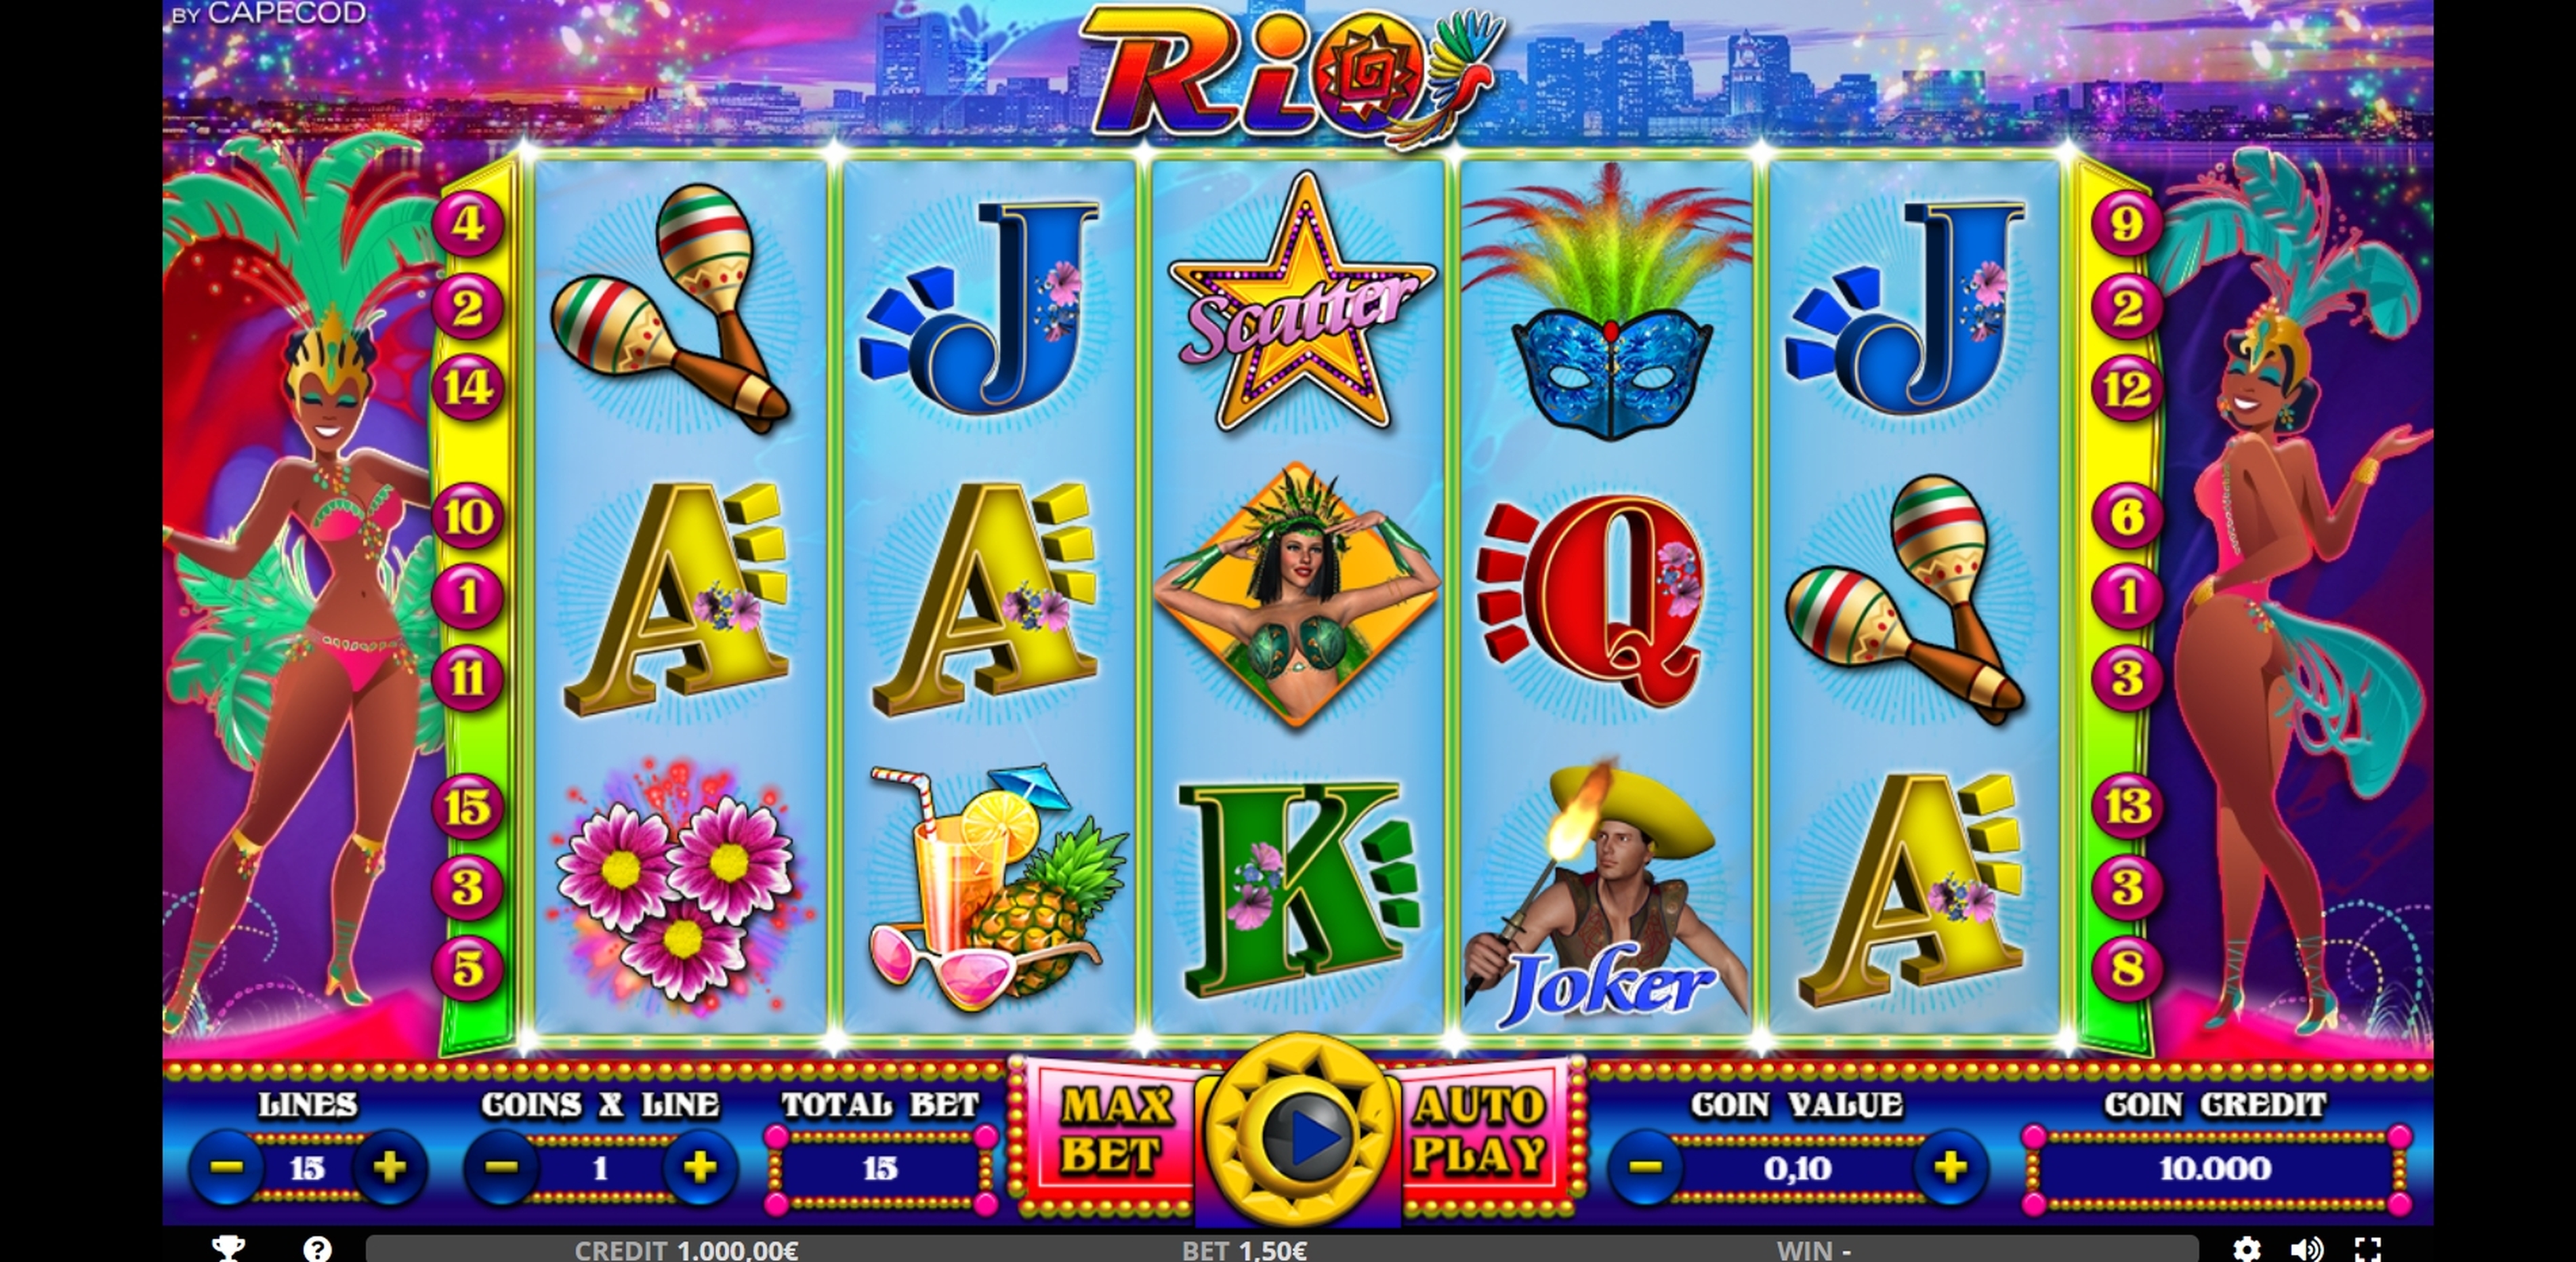 Reels in Rio Slot Game by Capecod Gaming